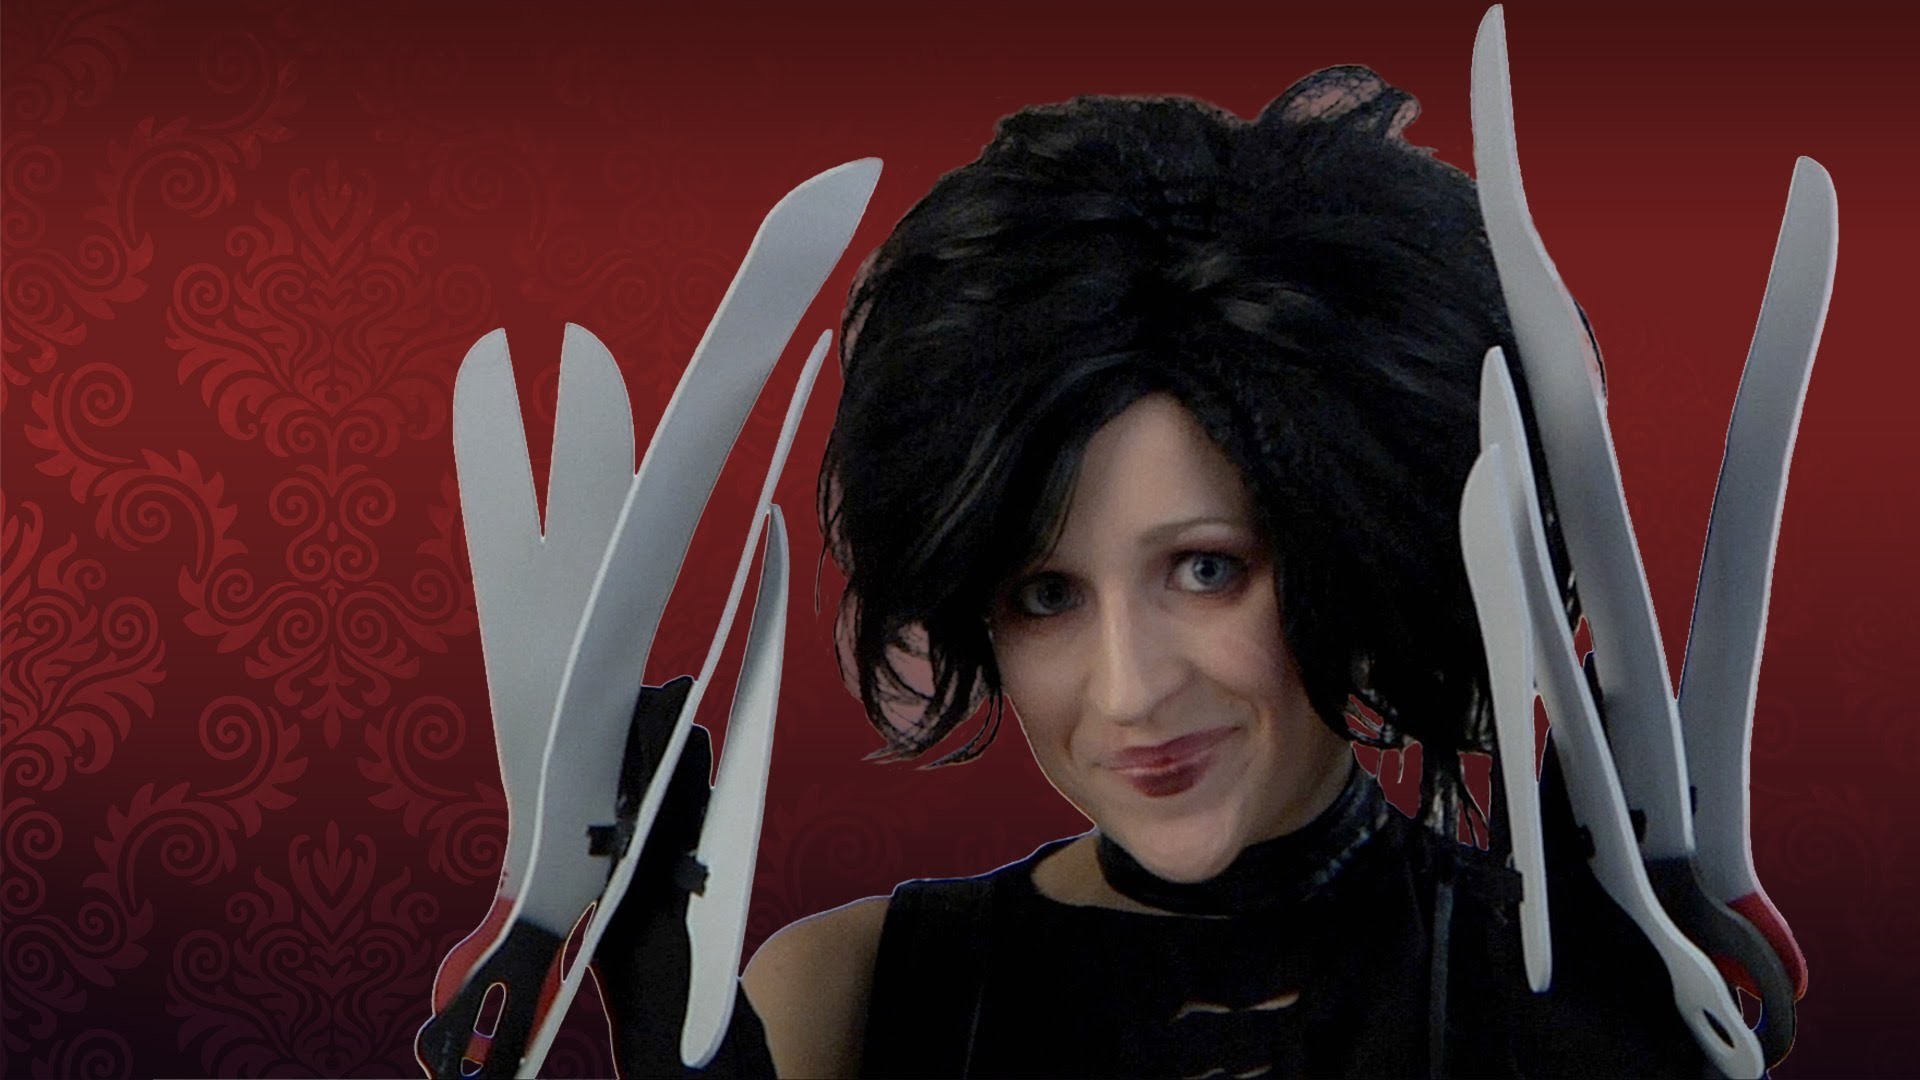 This Miss Edward Scissorhands makeup tutorial is a character-beauty applica...